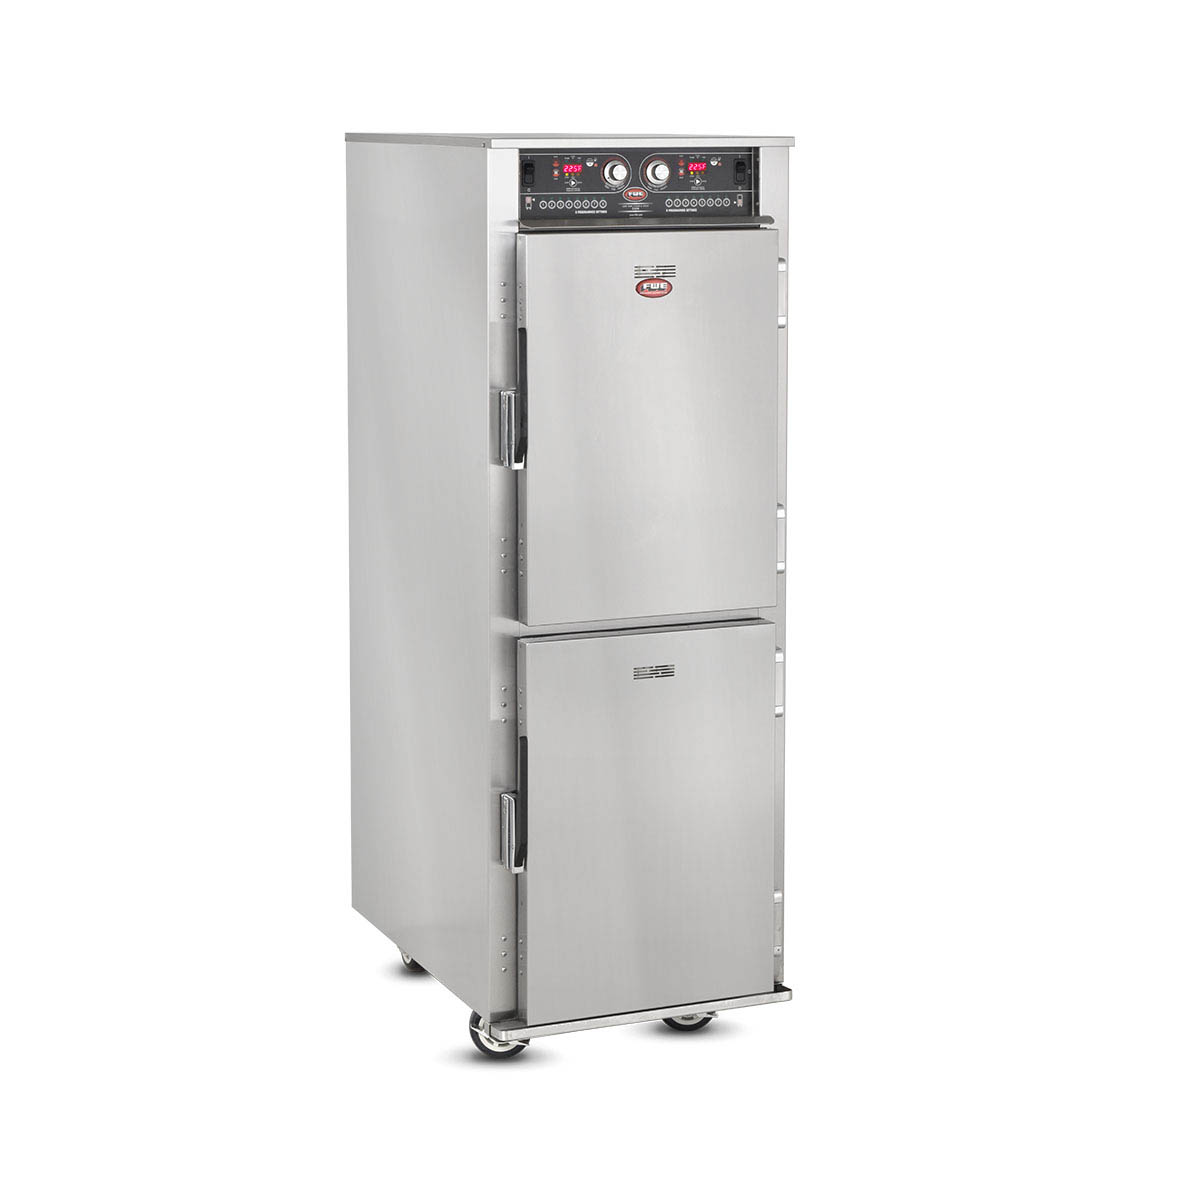 FWE LCH-1826-7-7-G2 Low Temp Cook / Hold / Oven Cabinet w/ Thermostatic Controls, Full-Size